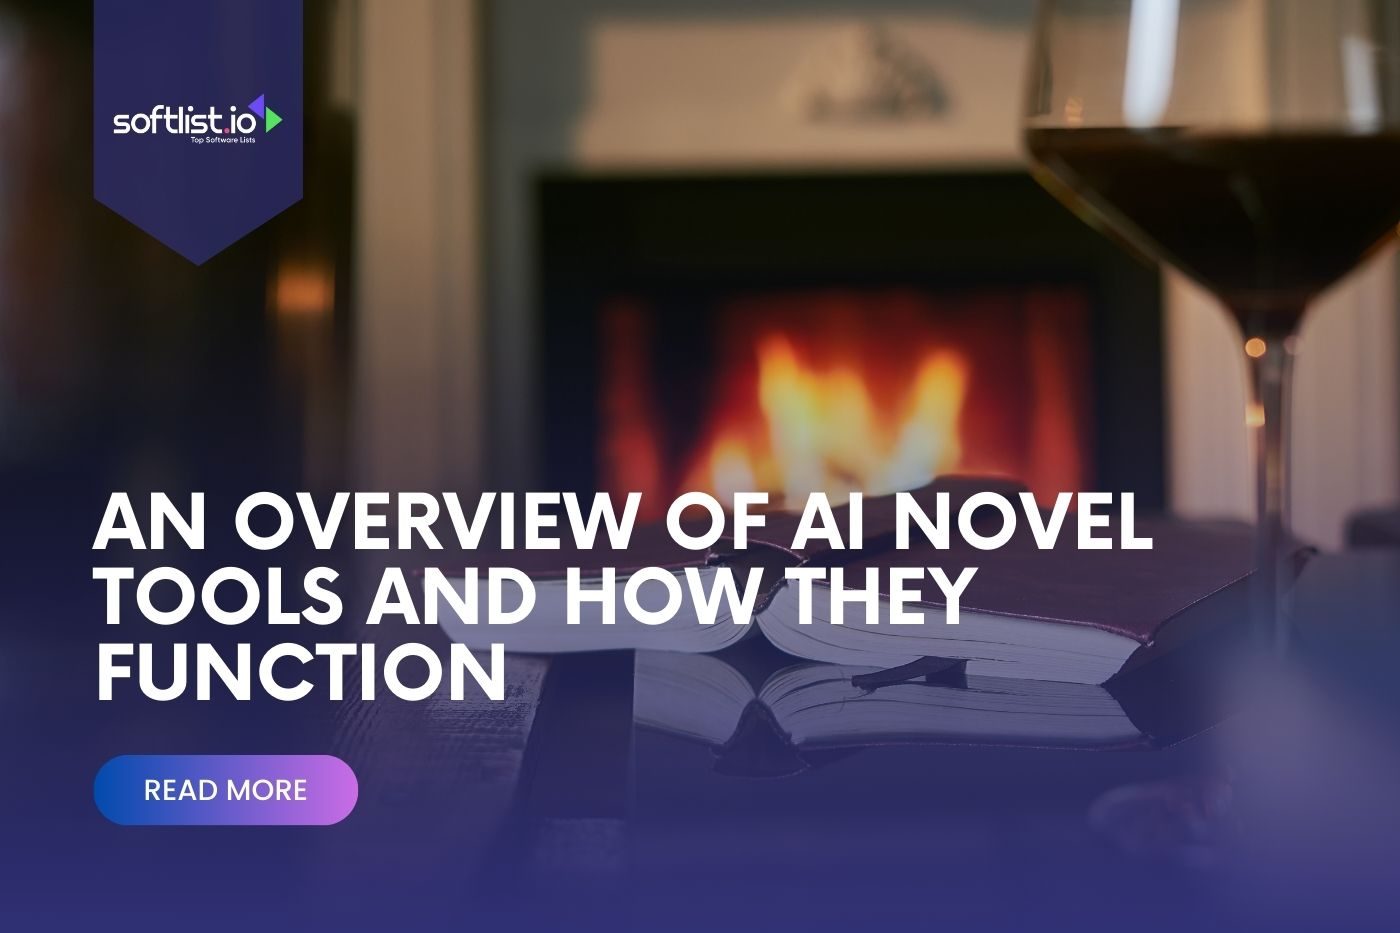 An Overview of AI Novel Tools and How They Function